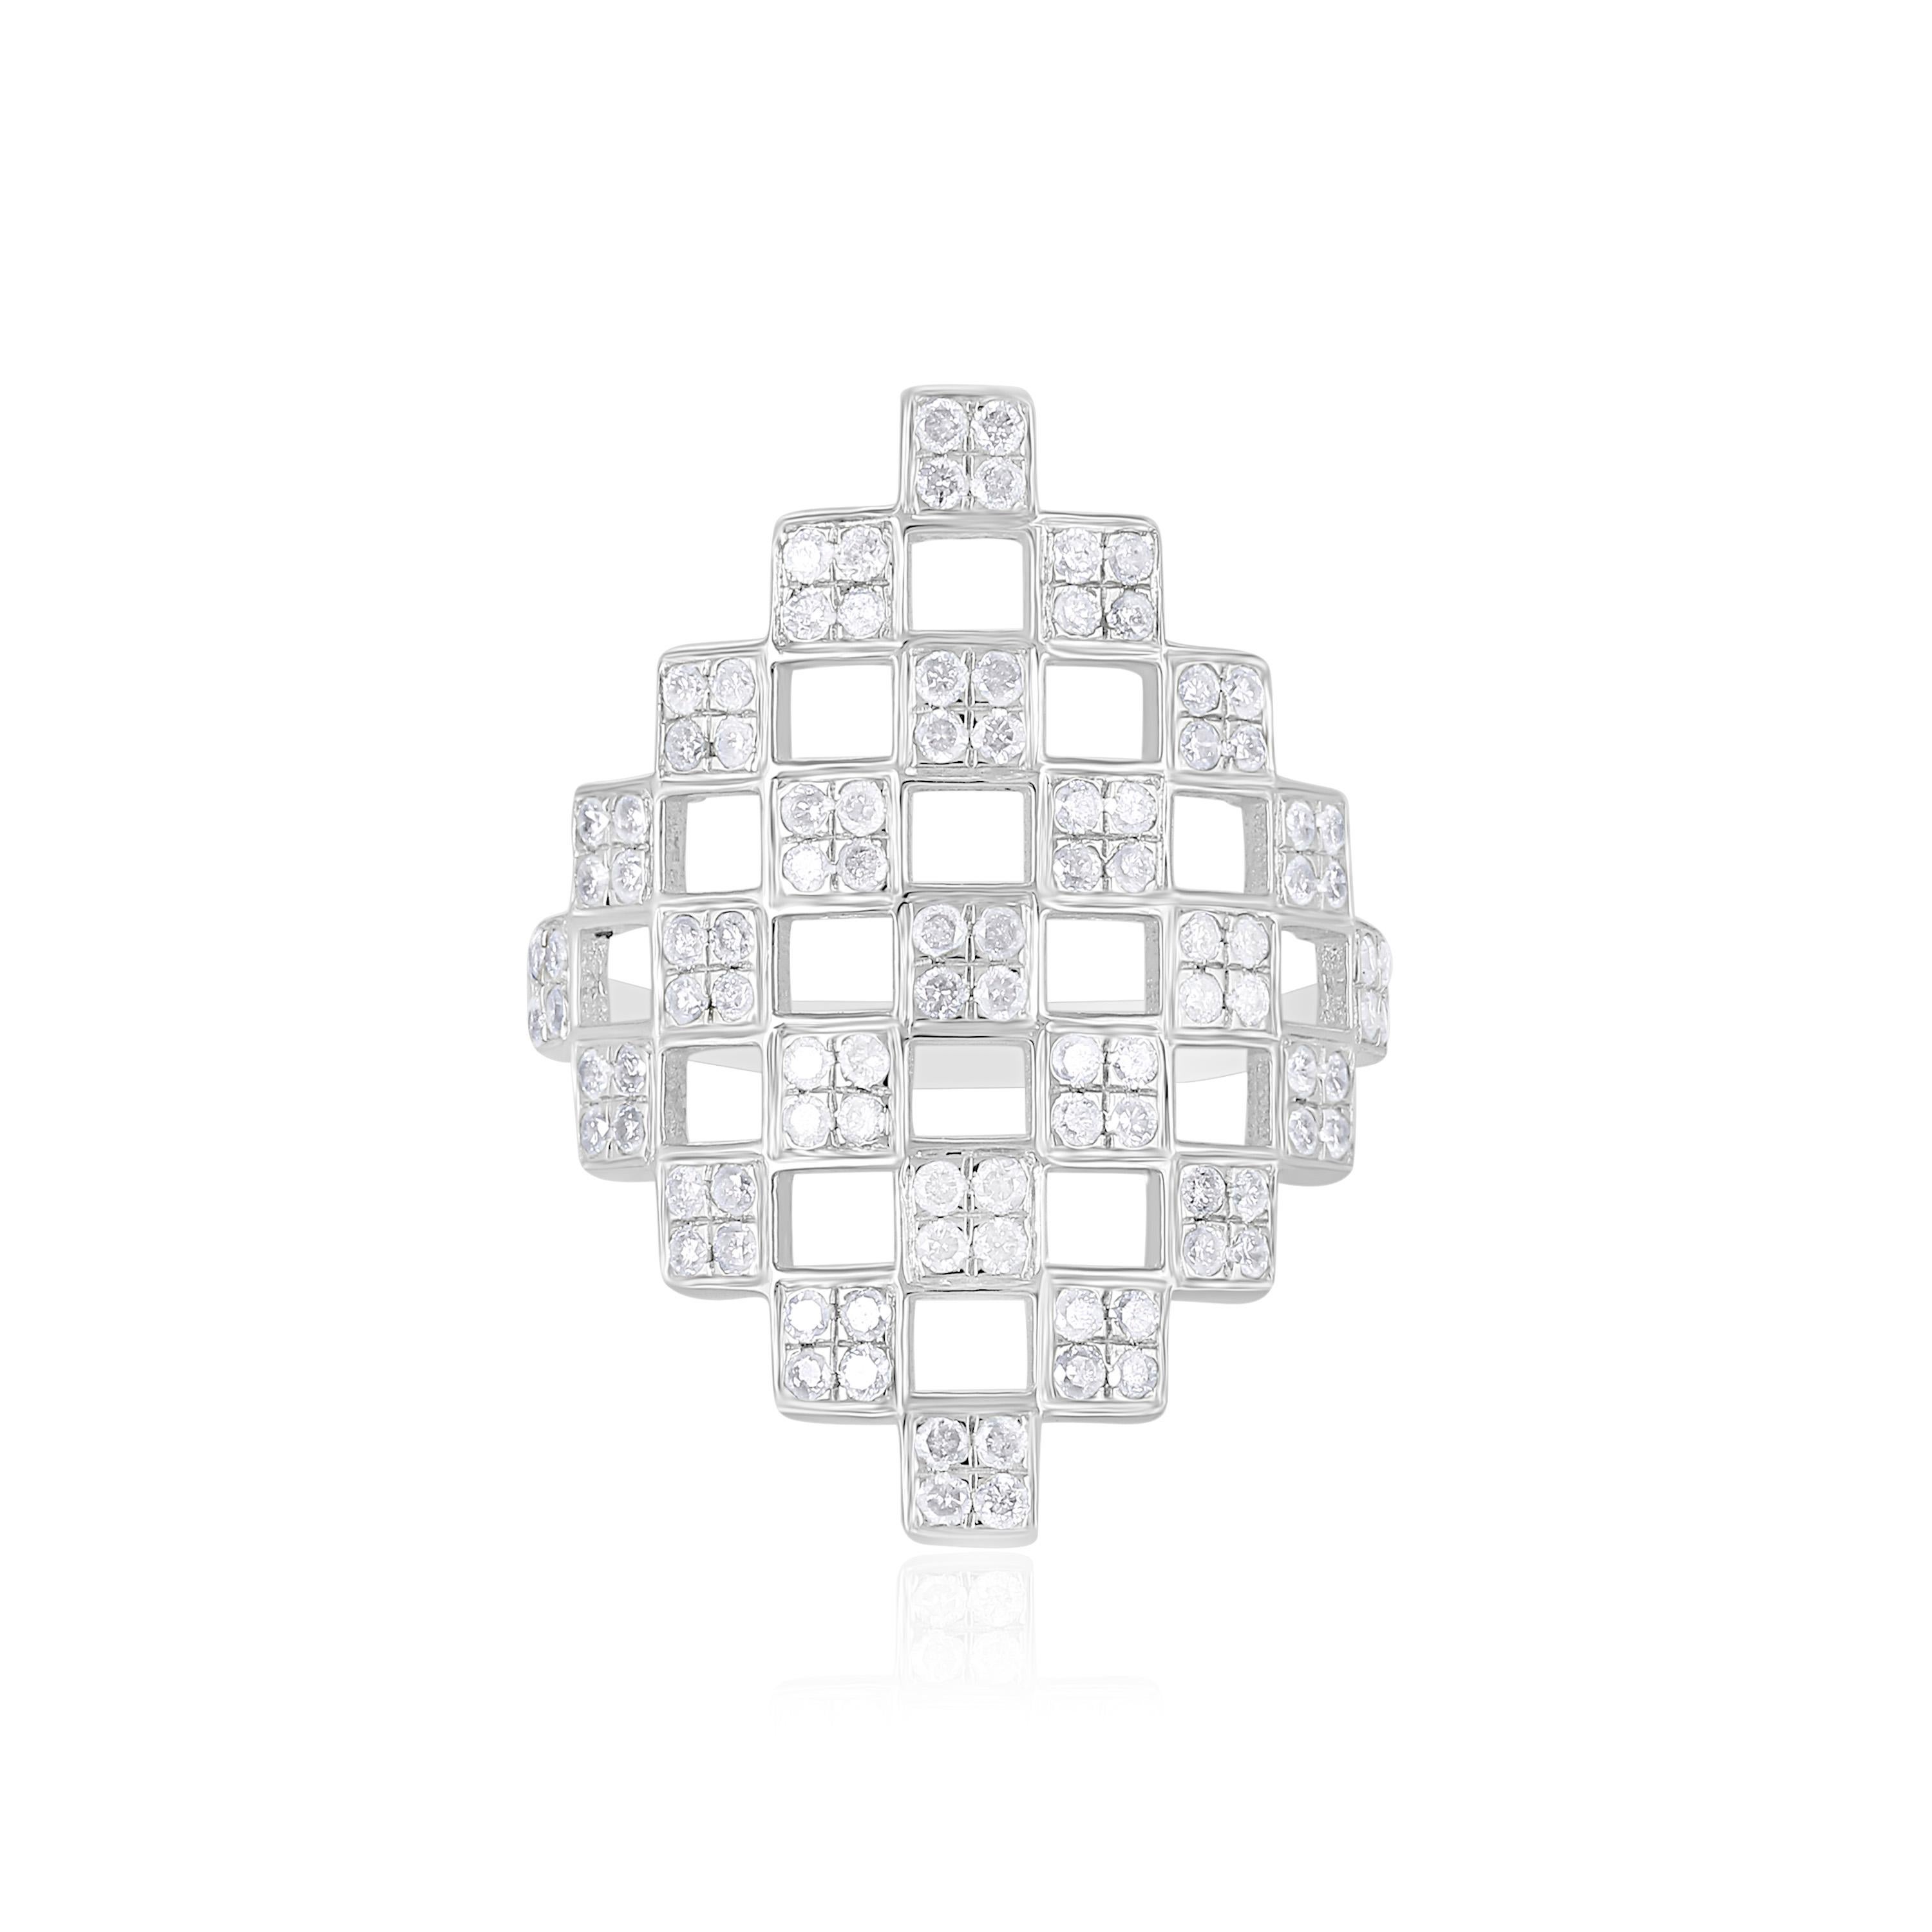 A creative mix of free form lattice designs by Gemistry, features alternating open and diamond studded squares weaving an artful and mesmerizing pattern . The 0.88 ct. t.w. round and pave diamonds enclosed in 925 polished sterling silver frames